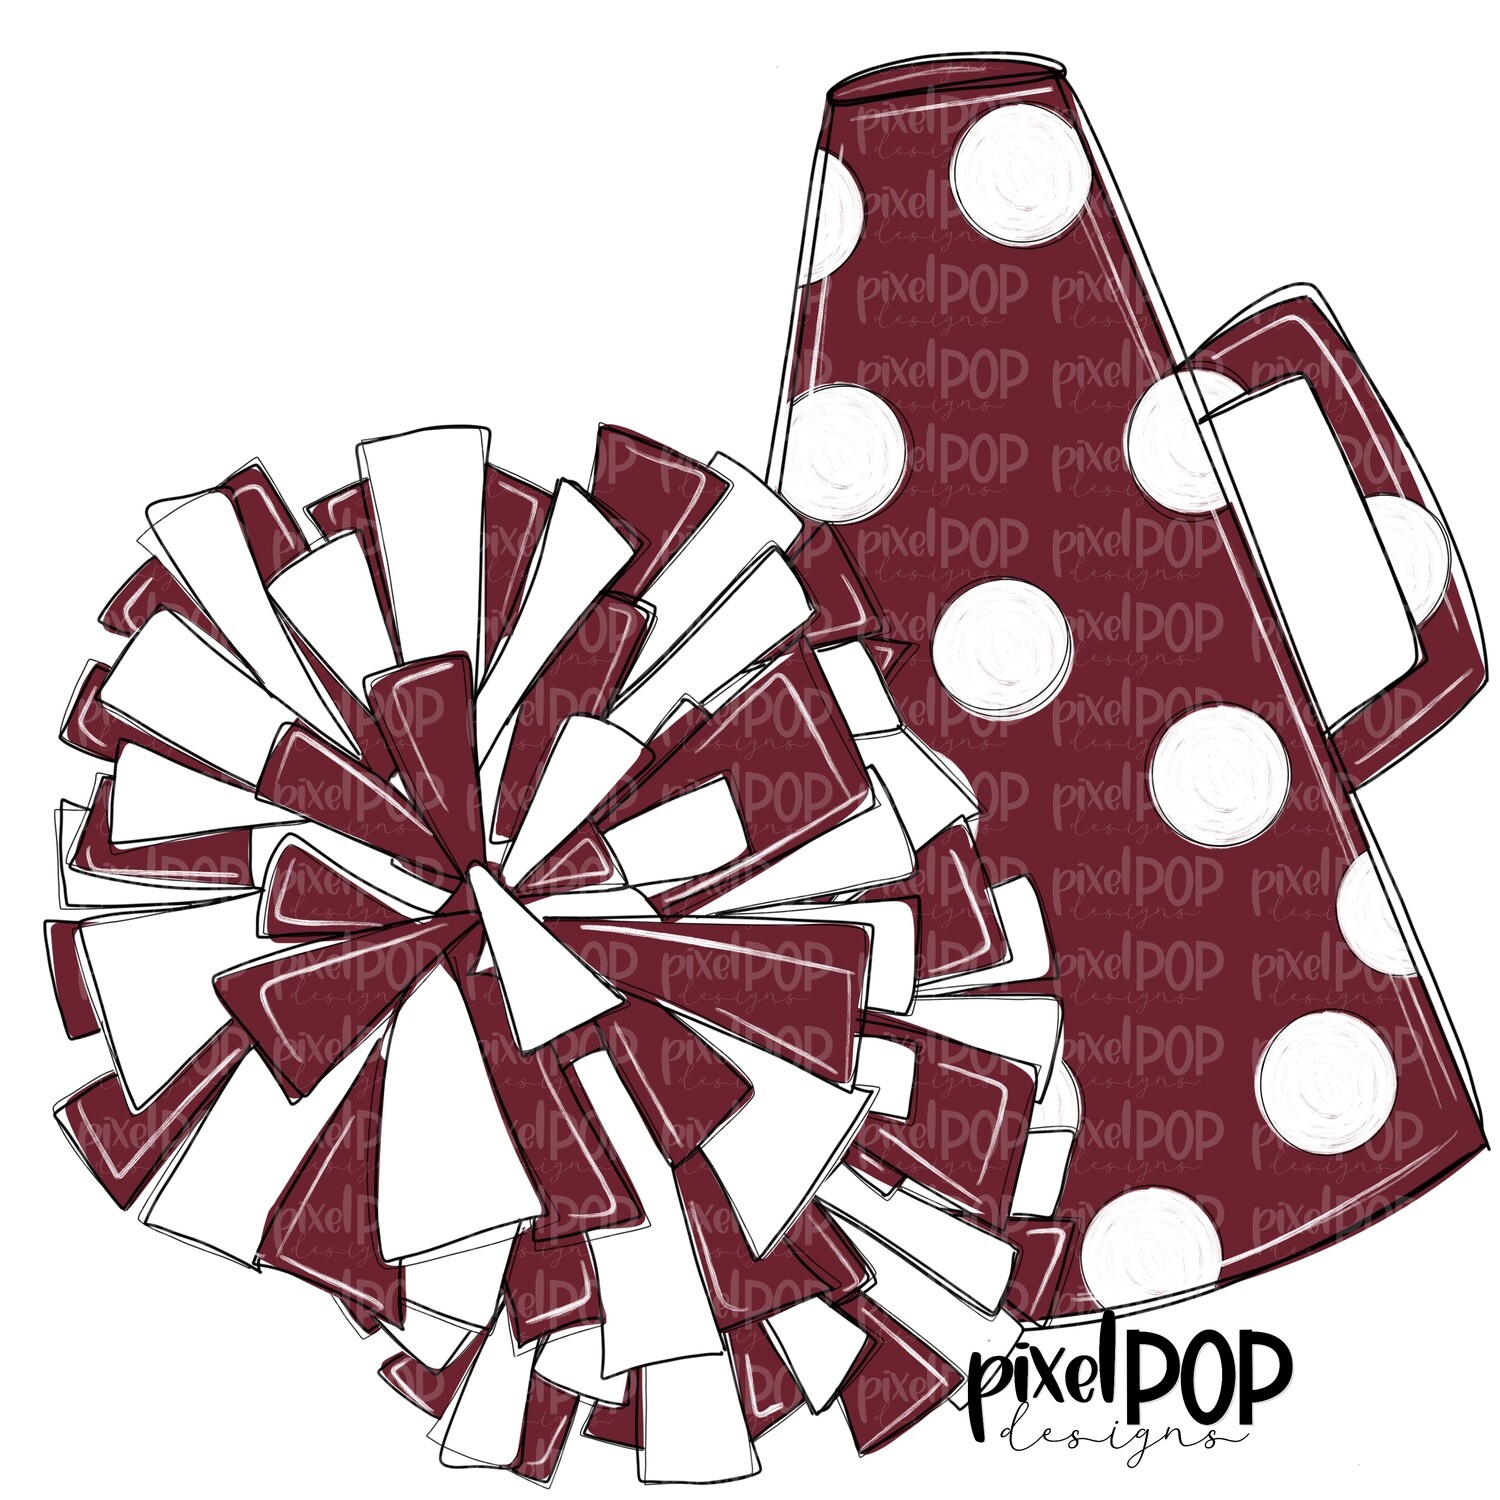 Cheerleading Megaphone and Poms Maroon and White  PNG | Cheerleading | Cheer Design | Cheer Art | Cheer Blank | Sports Art